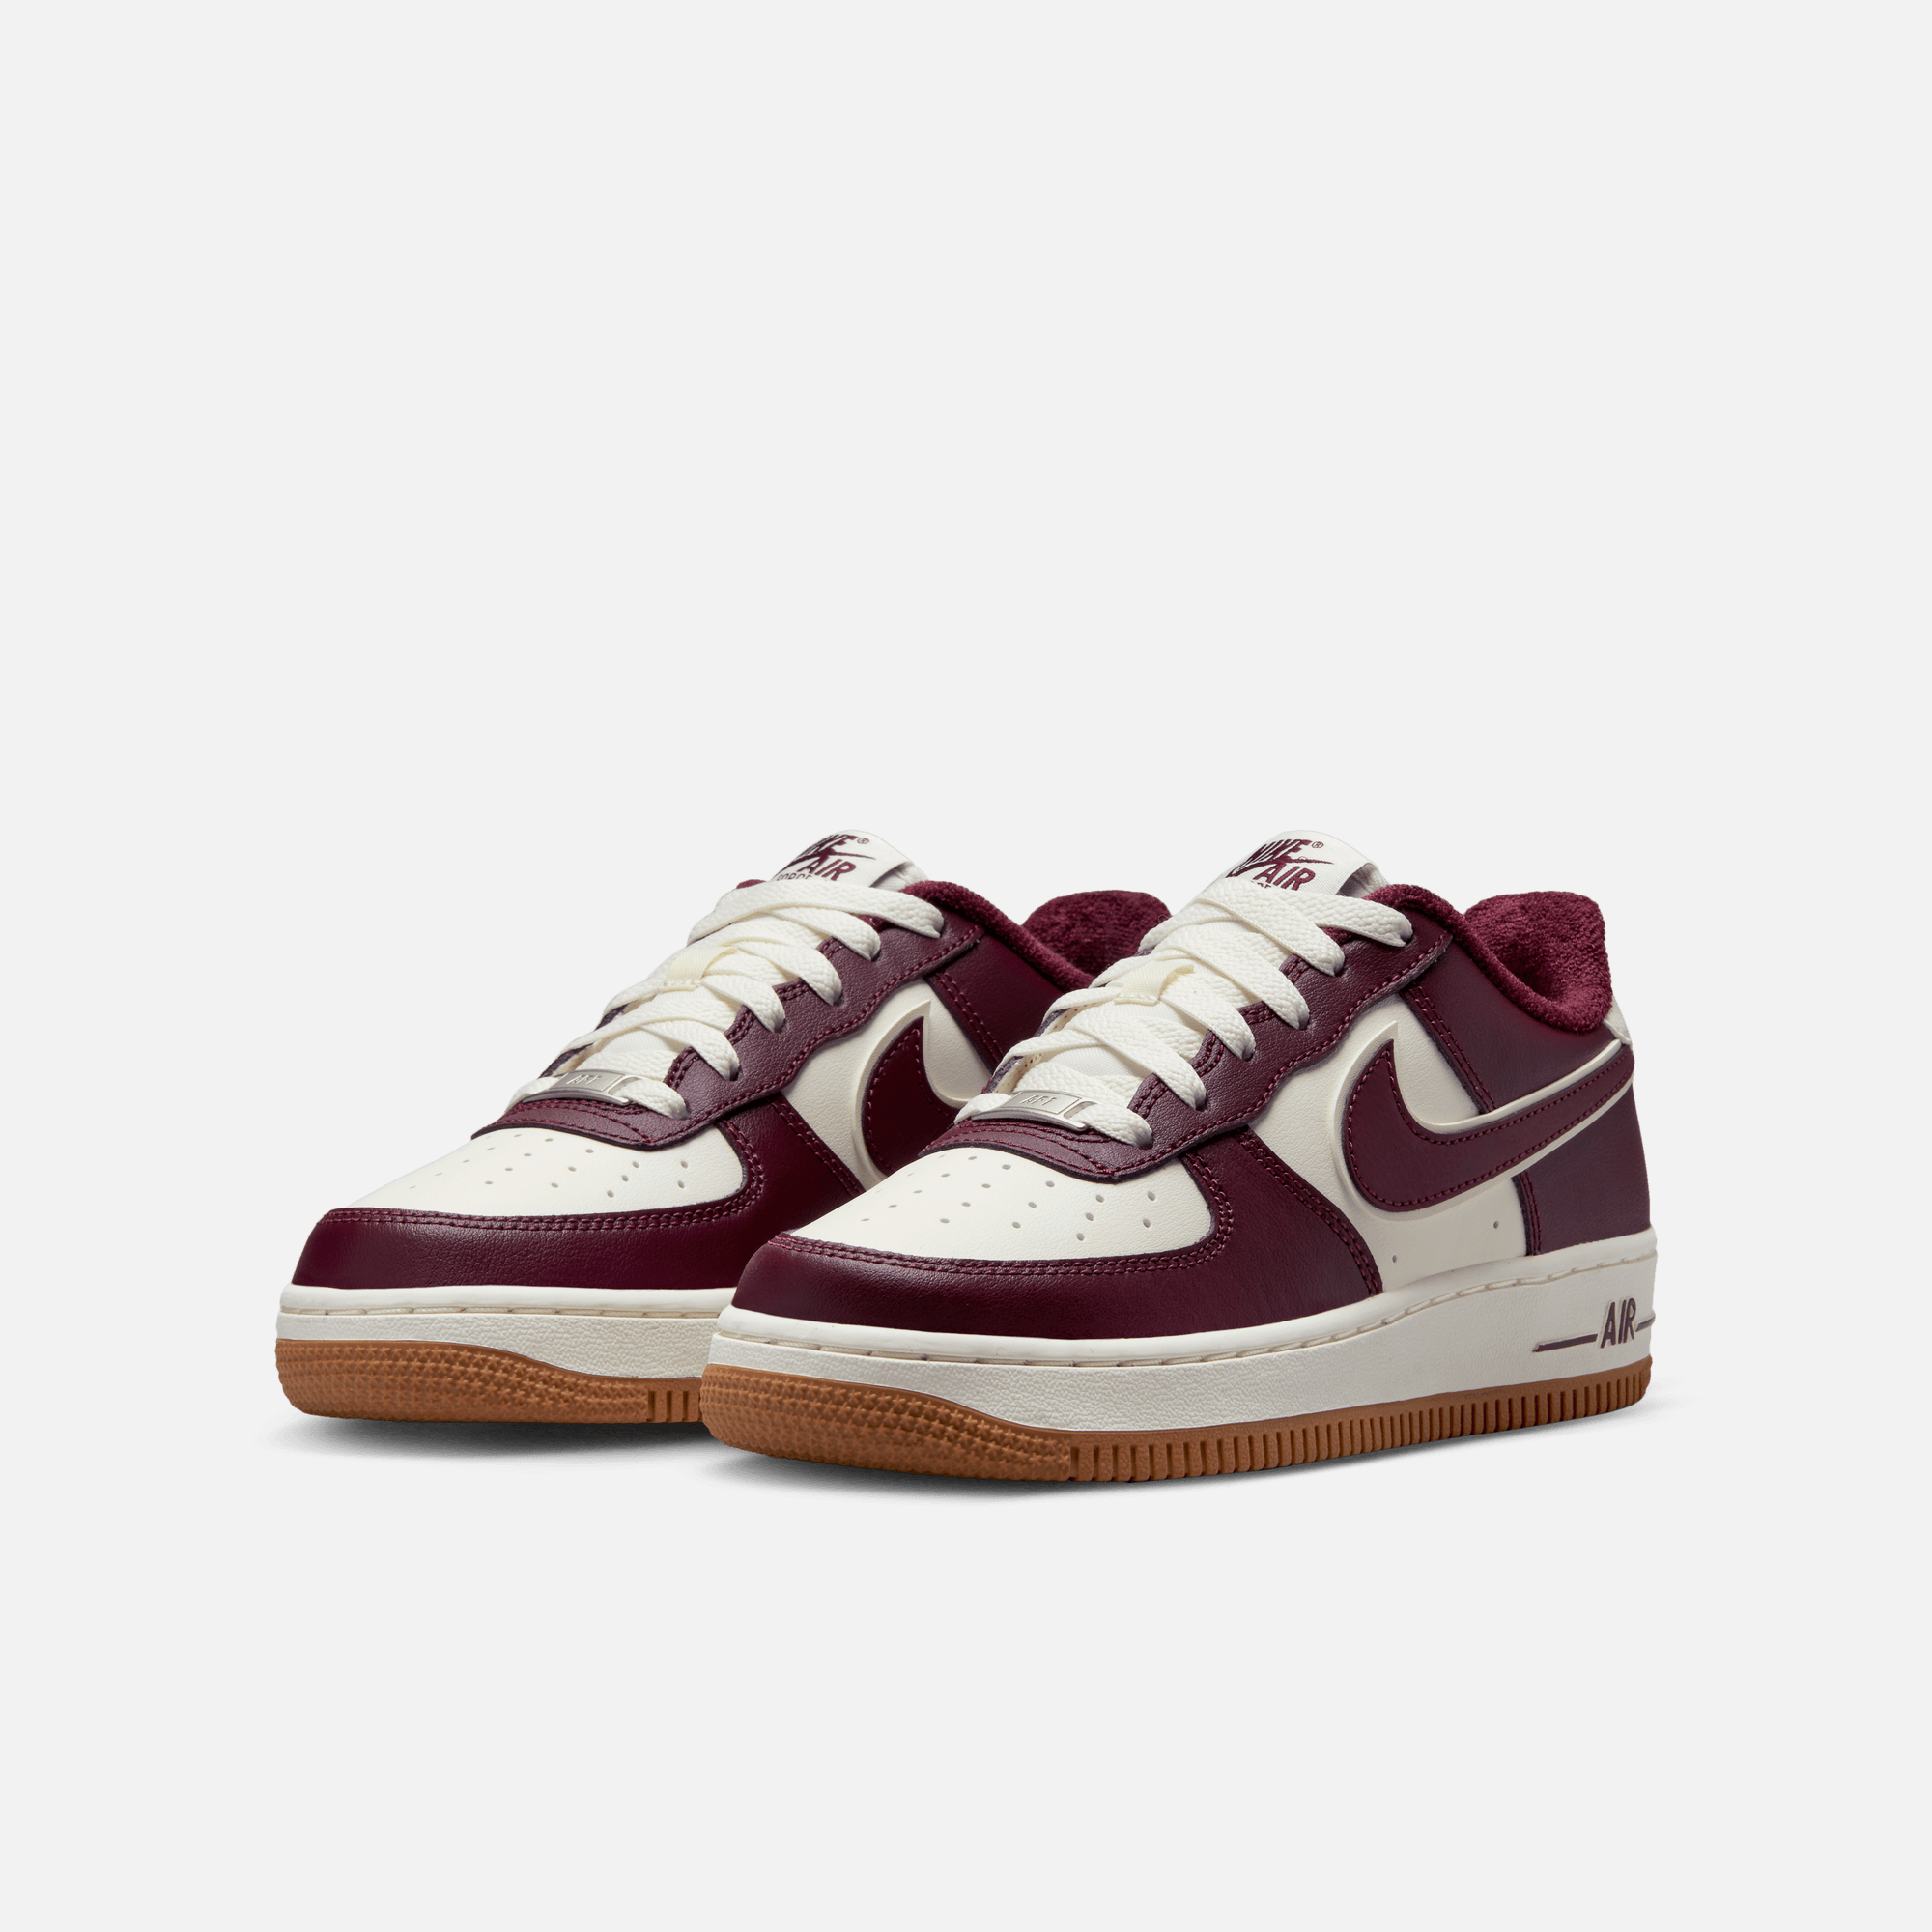 Shoes Nike AIR FORCE 1 LV8 3 (GS)